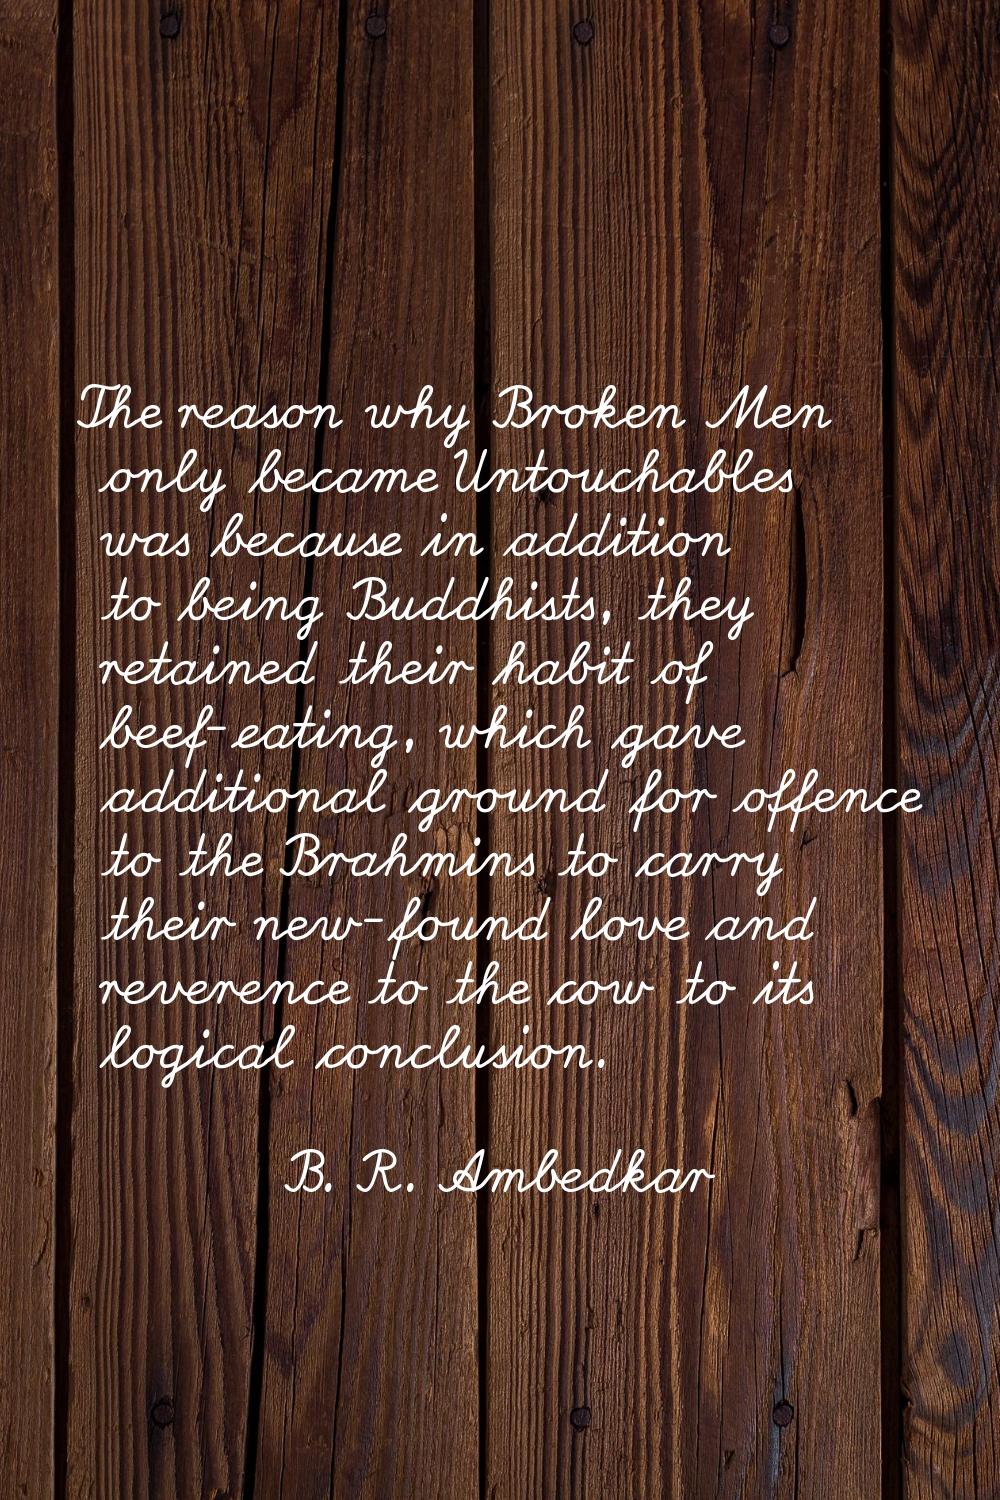 The reason why Broken Men only became Untouchables was because in addition to being Buddhists, they